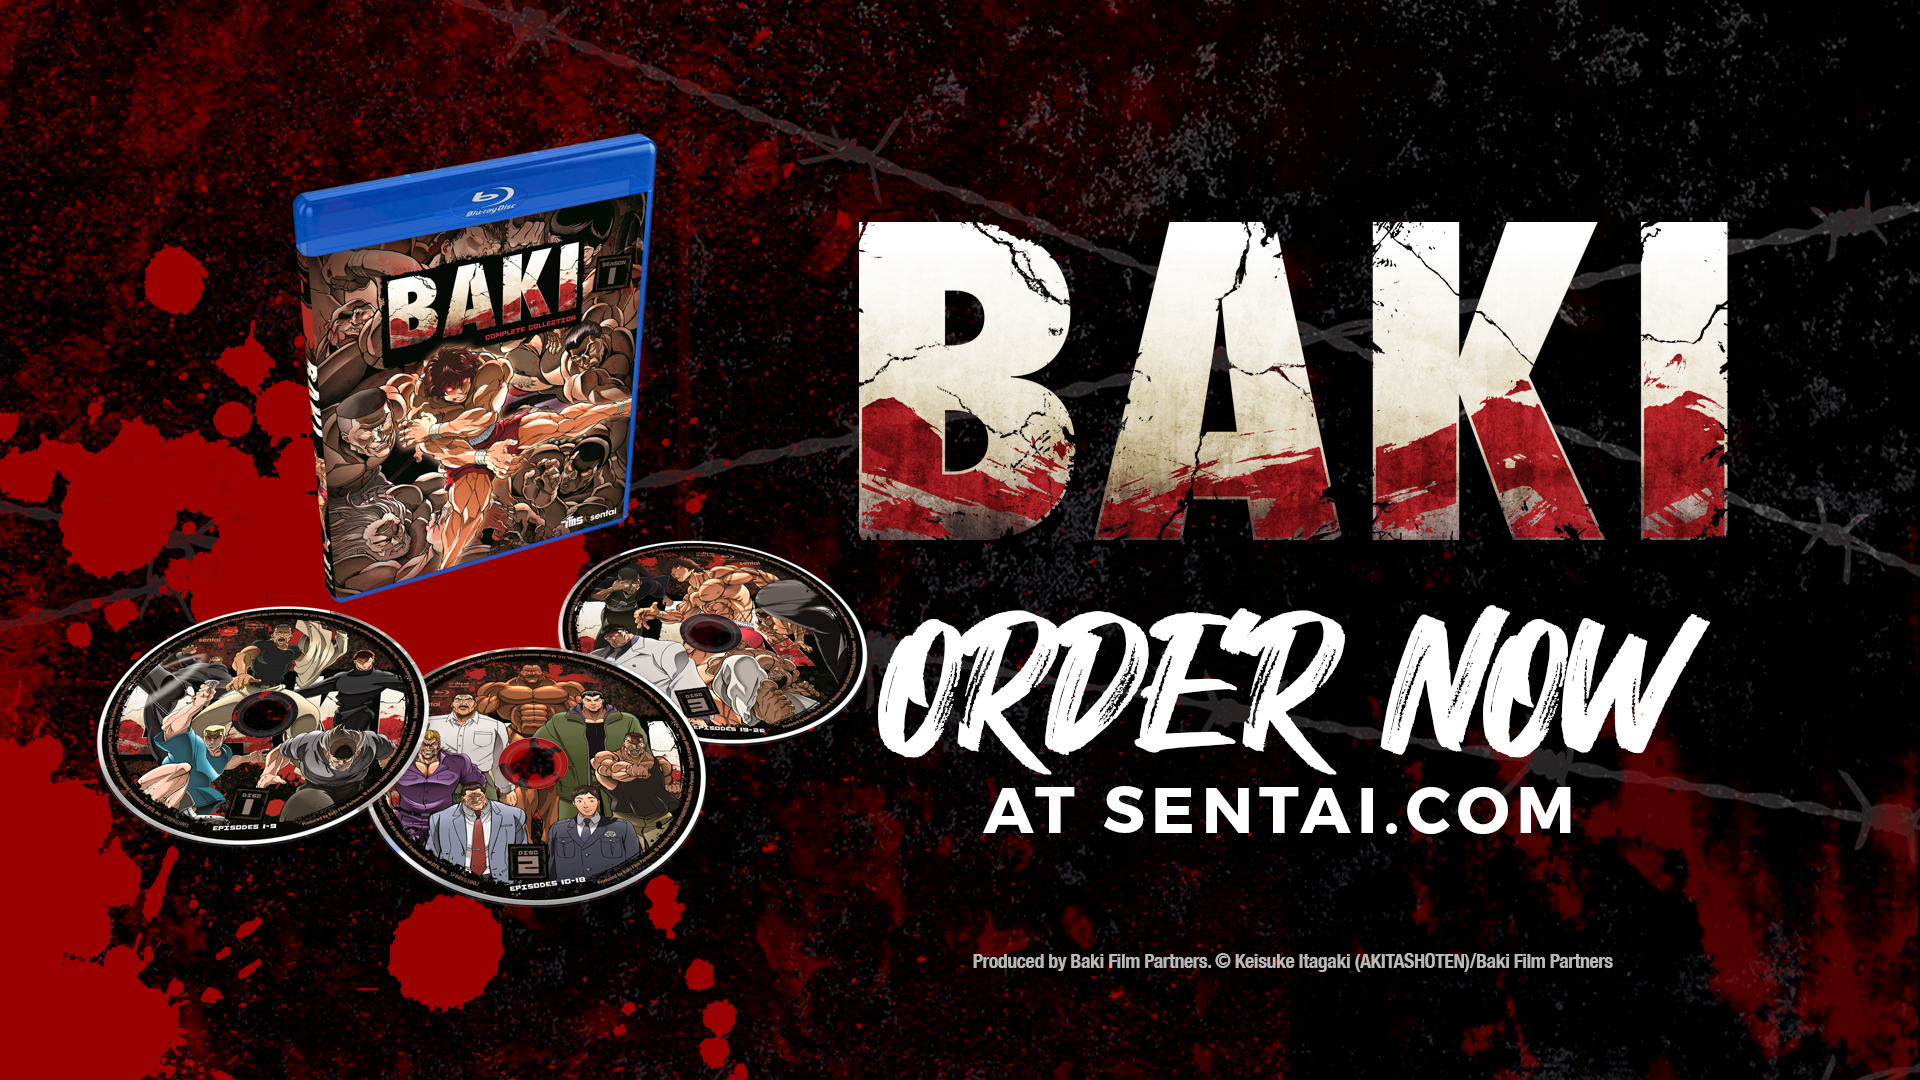 The logo, Blu-ray packaging and the three discs for Baki. The text says, "BAKI" and "Order now at sentai.com"